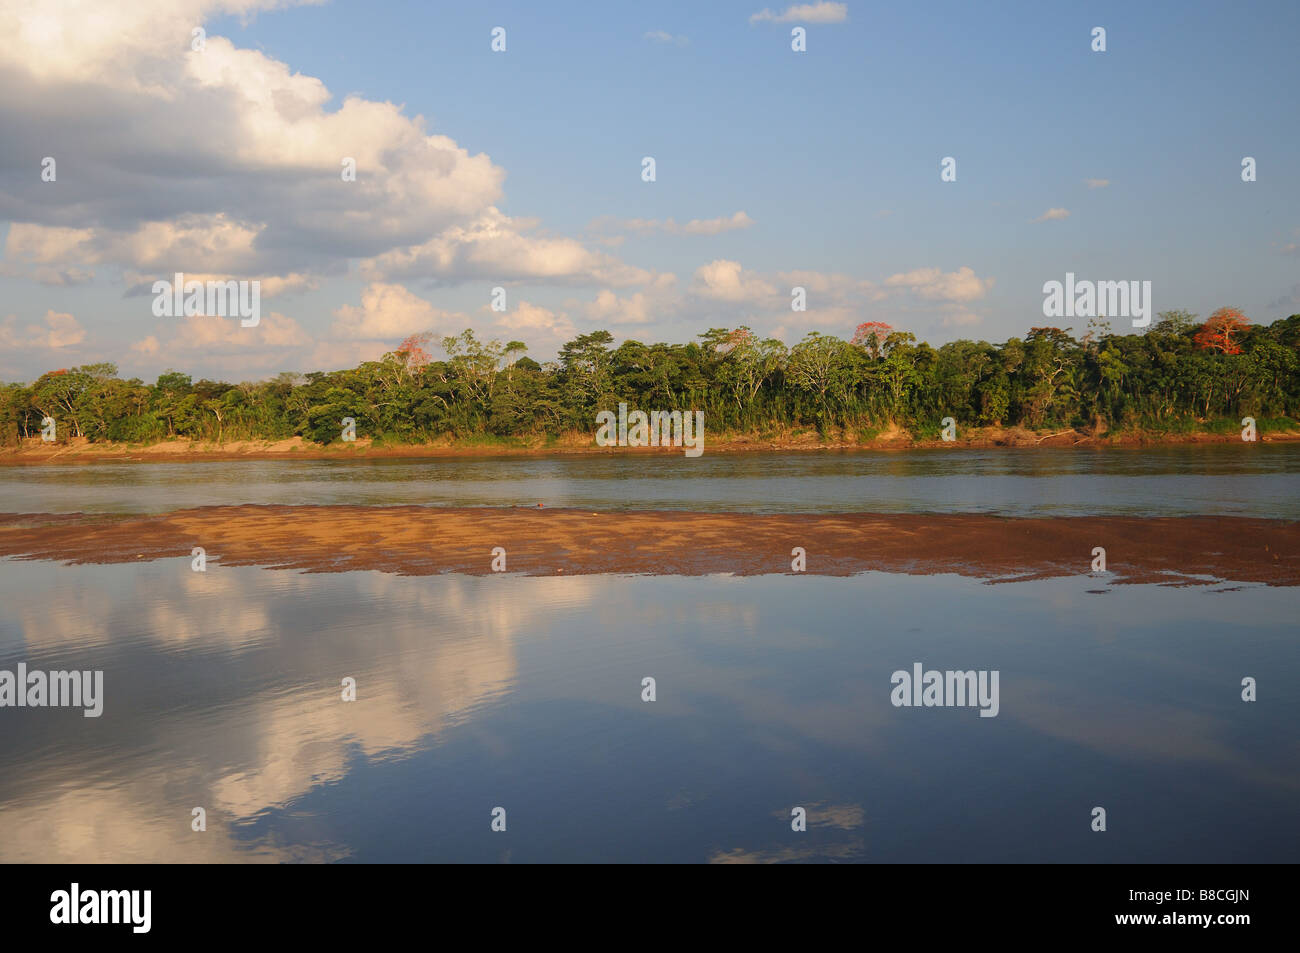 Reflections in the Tambopata River. Stock Photo